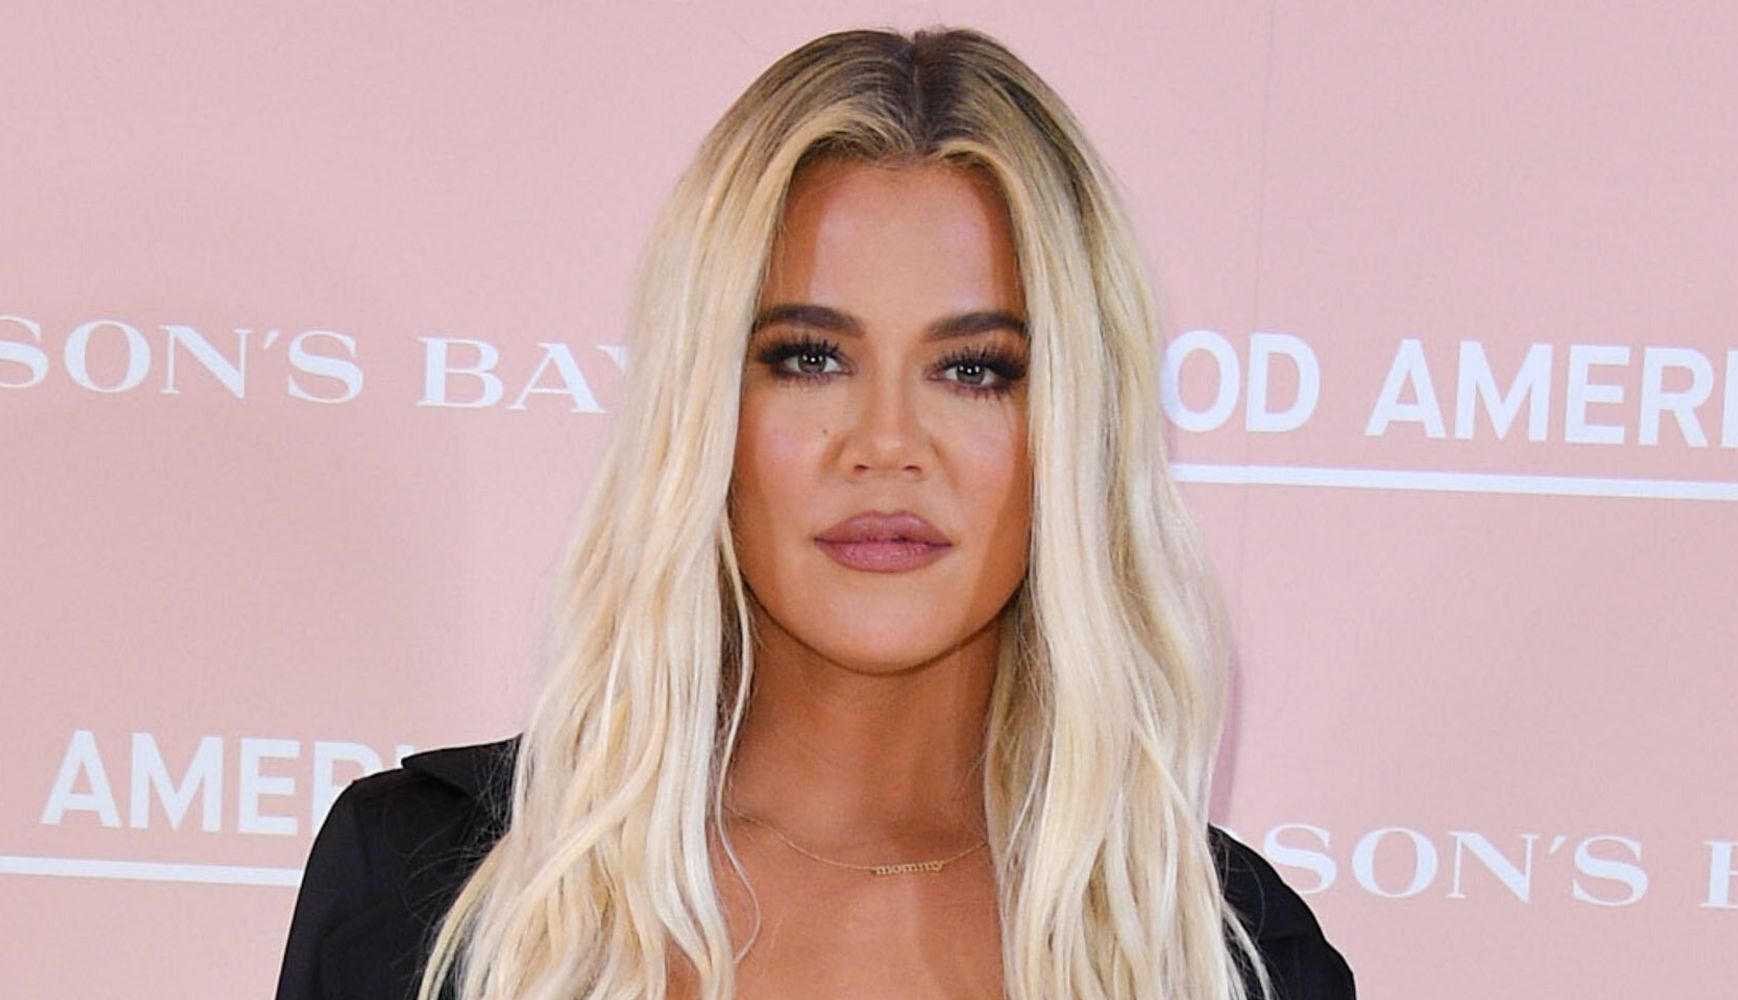 Khloe Kardashian Is Now In A Very Messy Love Triangle Over This Bikini Photo